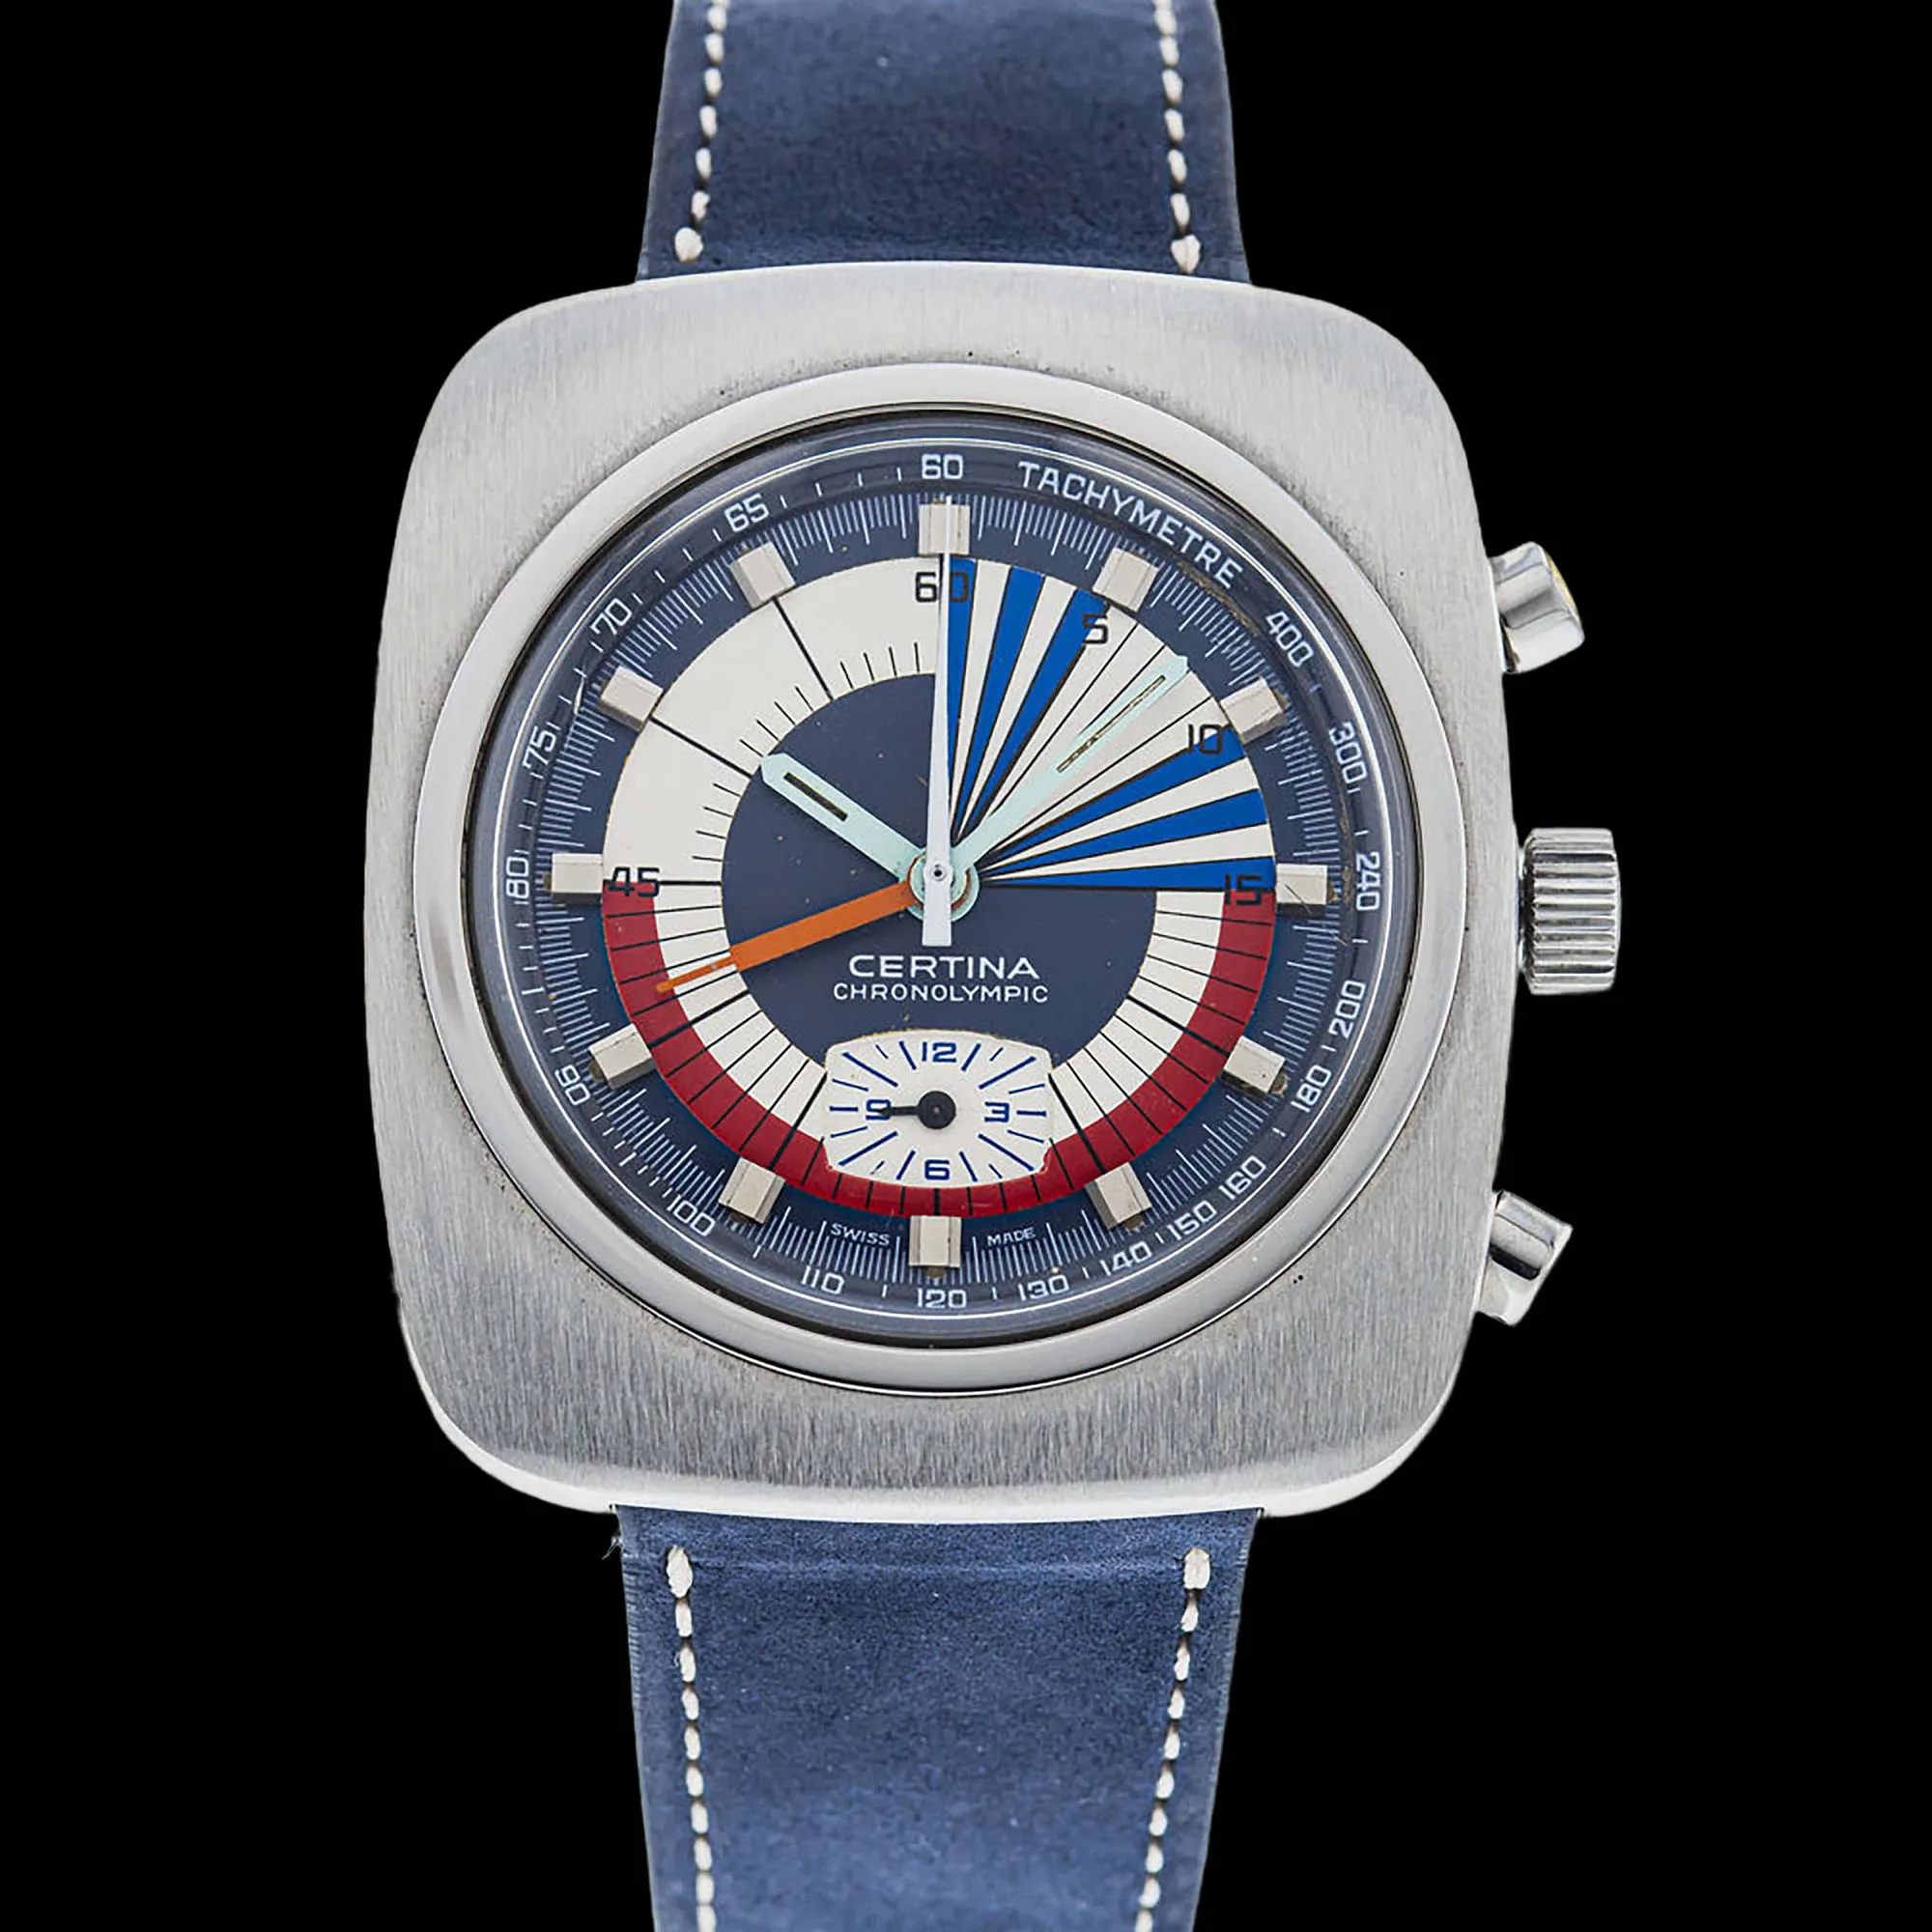 Certina Chronolympic 39mm Stainless steel Blue